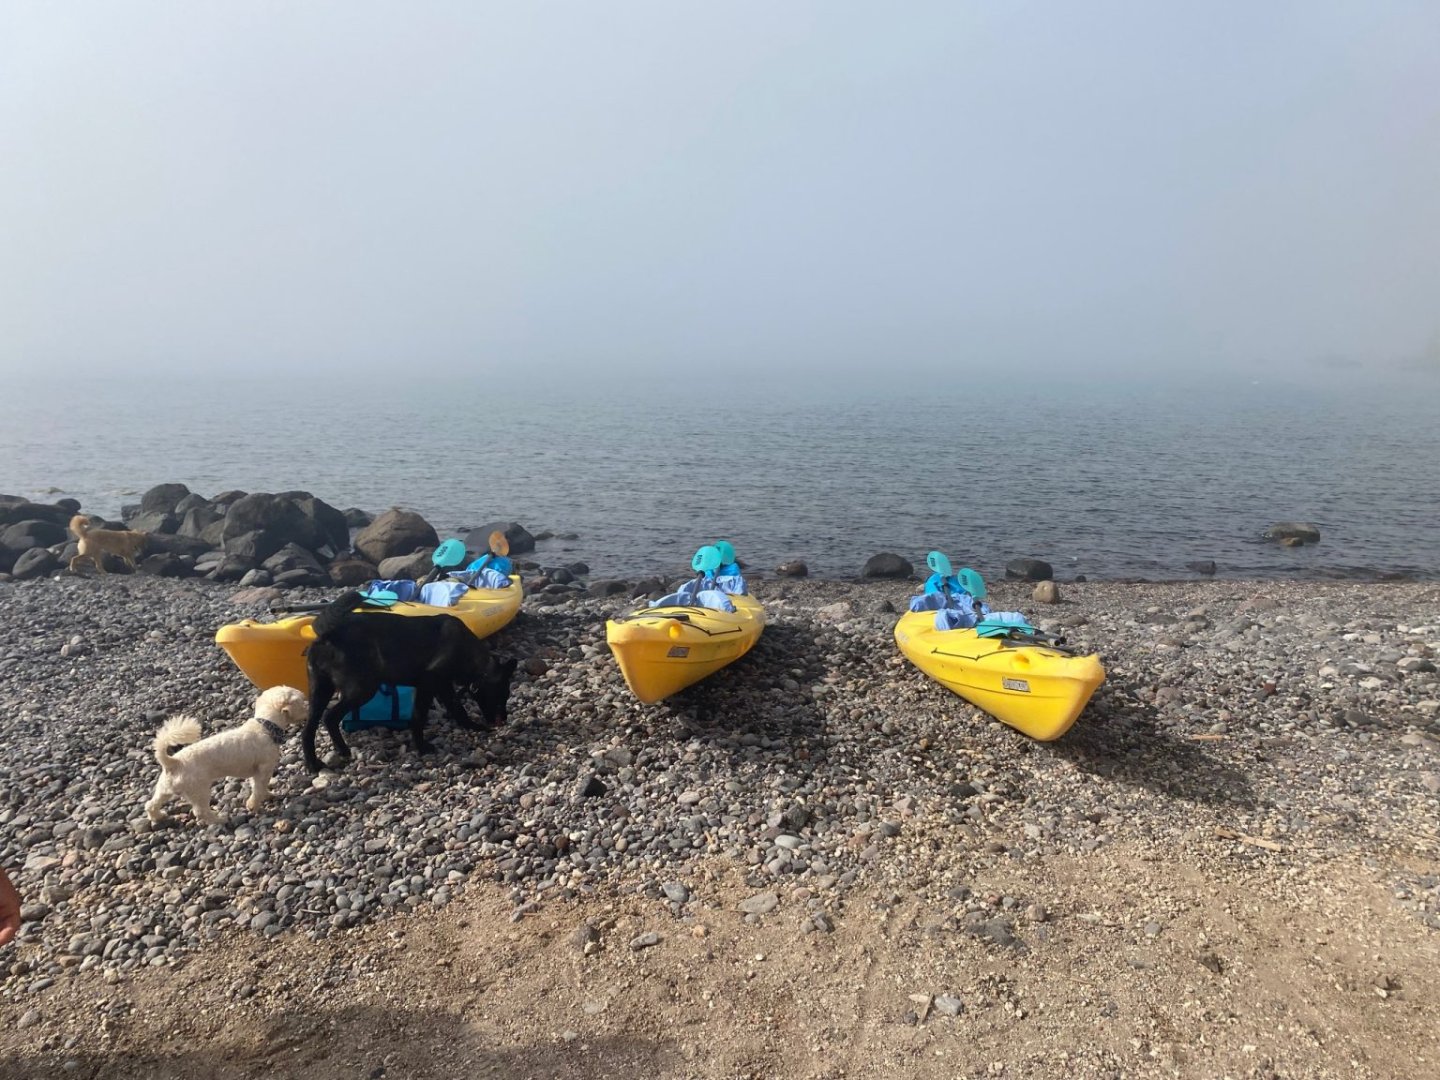 3 kayaks on the beach on a misty morning with a small white dog and a larger black one